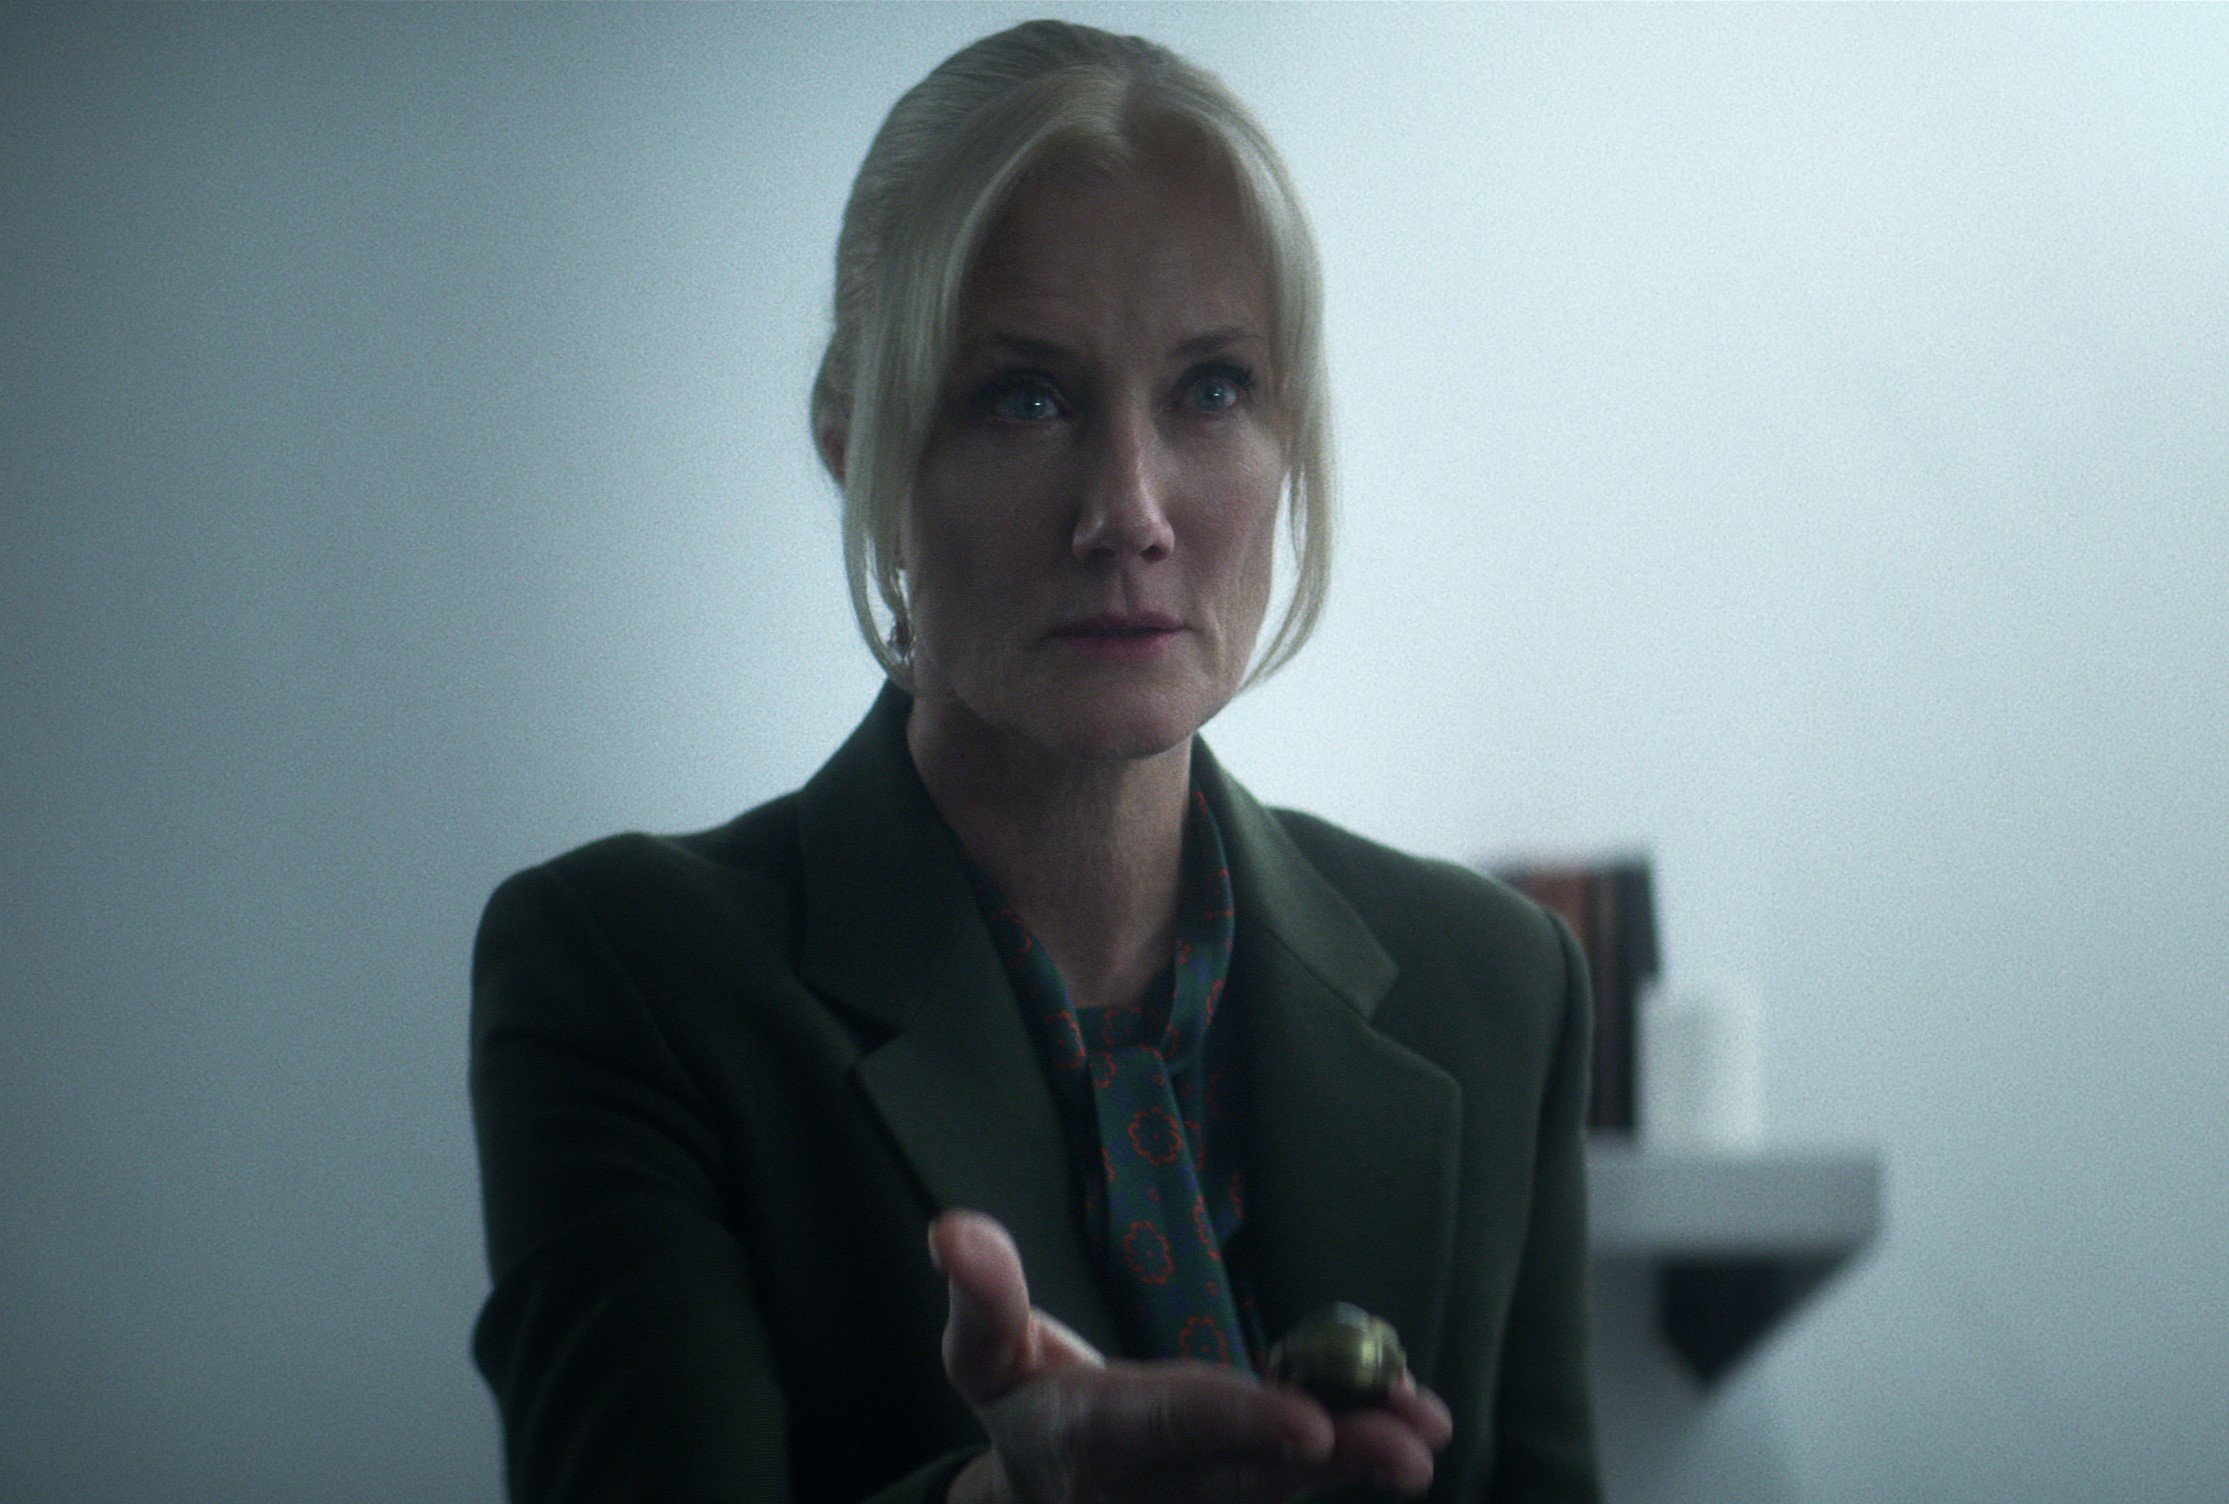 Joely Richardson as Ethel Cripps in 'The Sandman' cast. She's holding out an artifact in the photo.